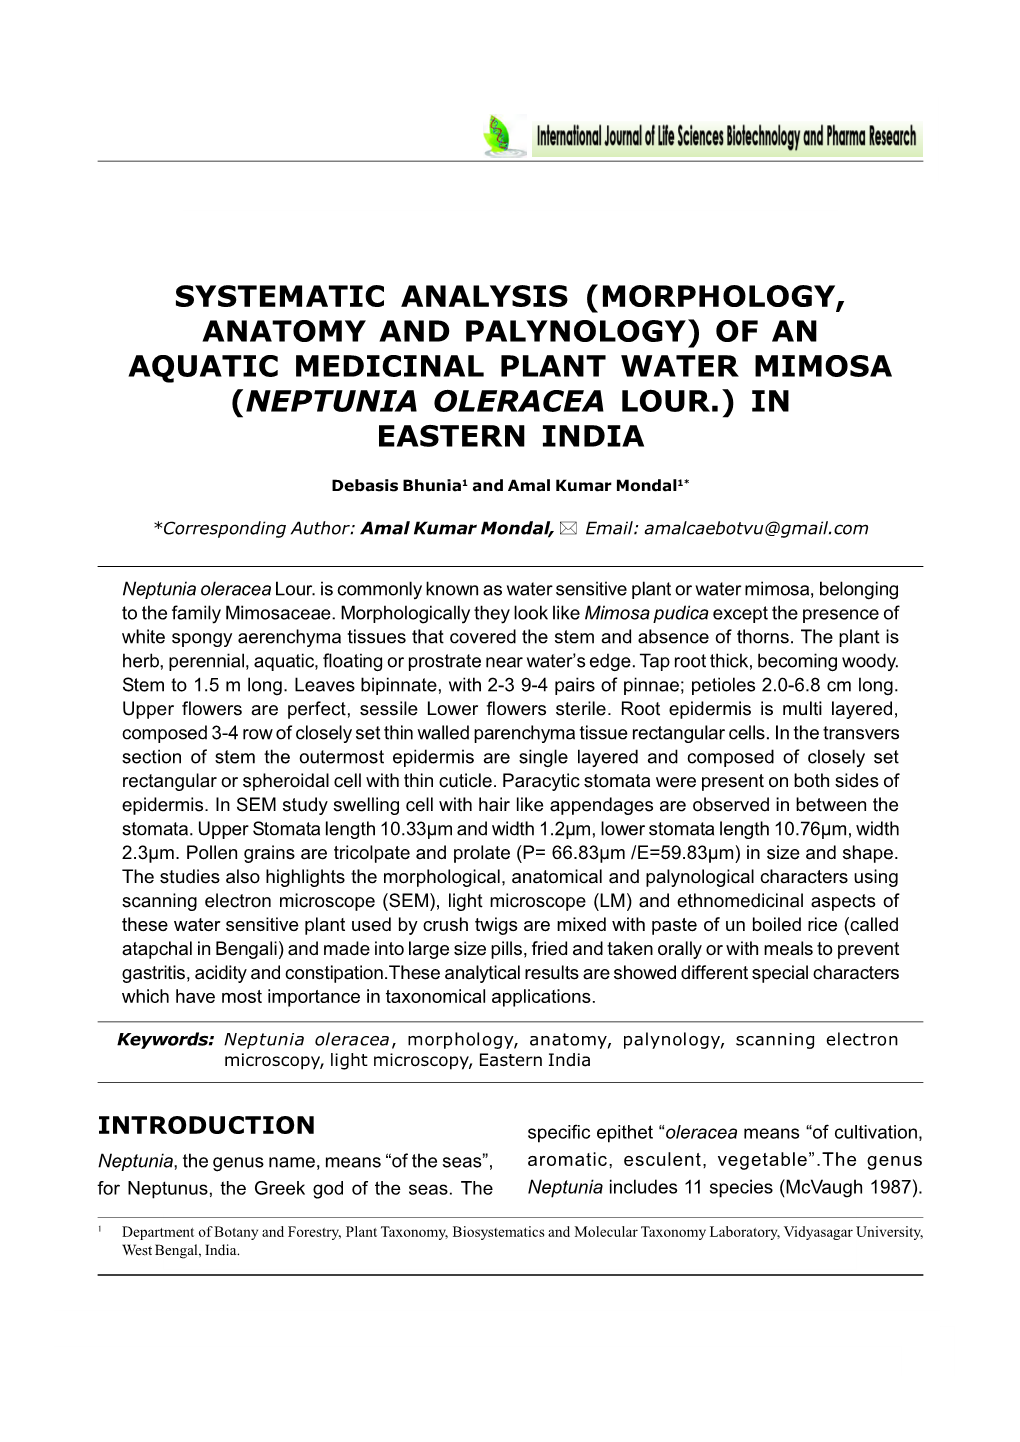 Systematic Analysis (Morphology, Anatomy and Palynology) of an Aquatic Medicinal Plant Water Mimosa (Neptunia Oleracea Lour.) in Eastern India